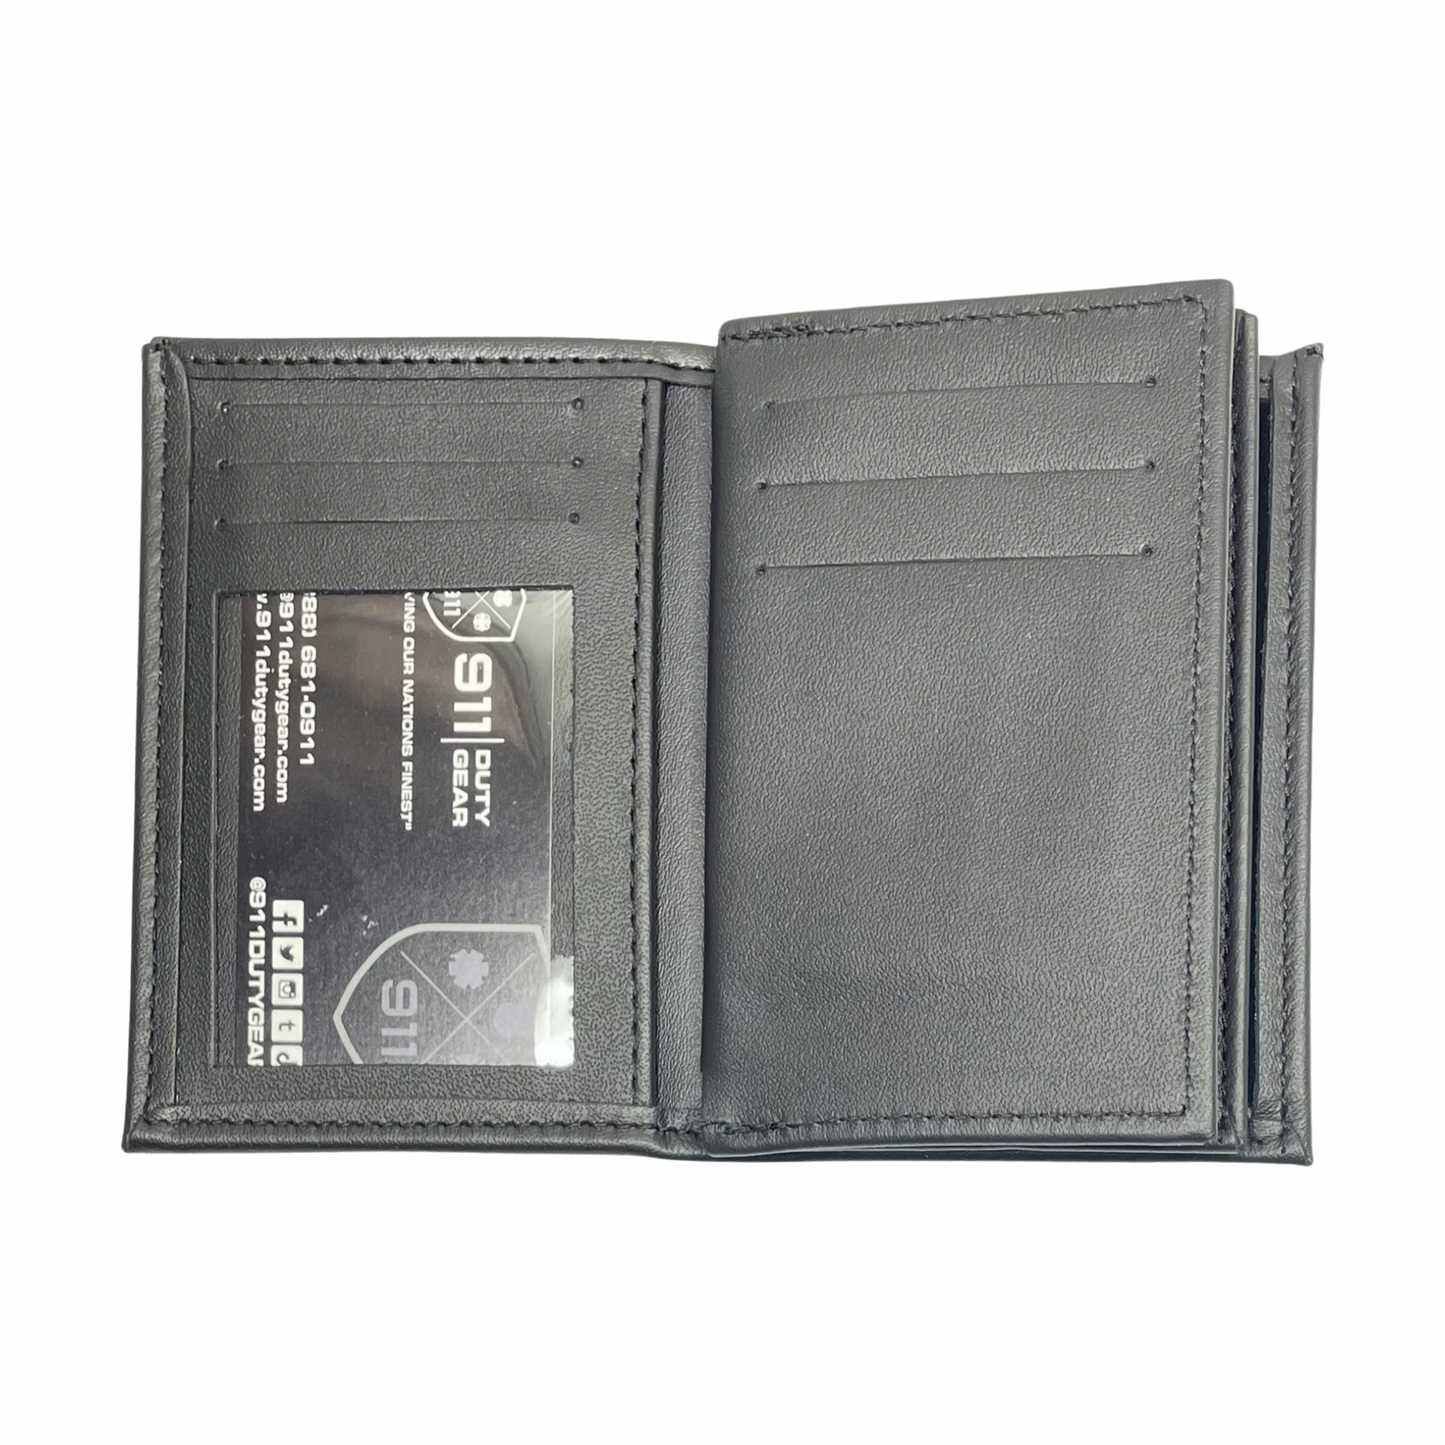 Federal Reserve Police Horizontal Bifold Double ID Credential & Hidden Badge Wallet-Perfect Fit-911 Duty Gear USA